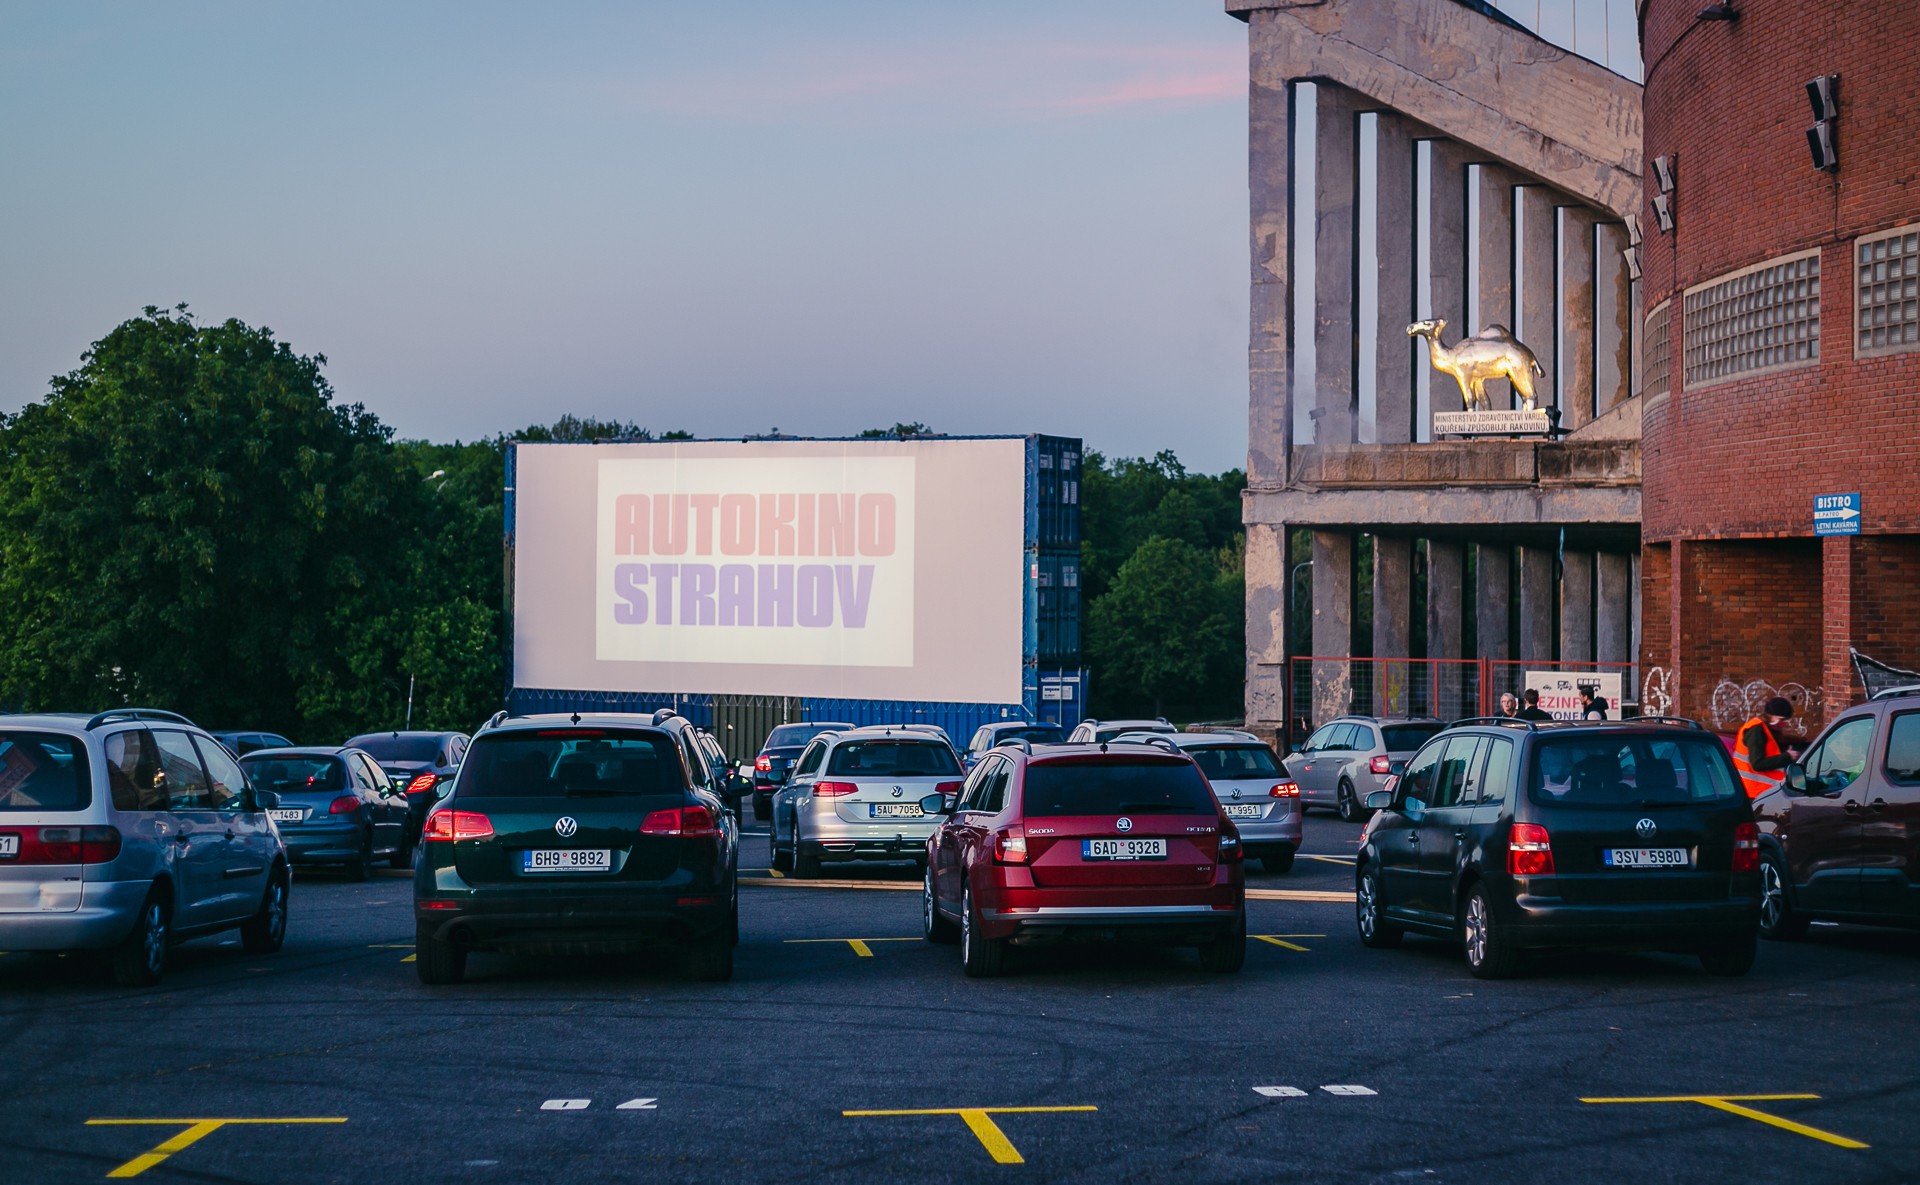 Car cinema for events